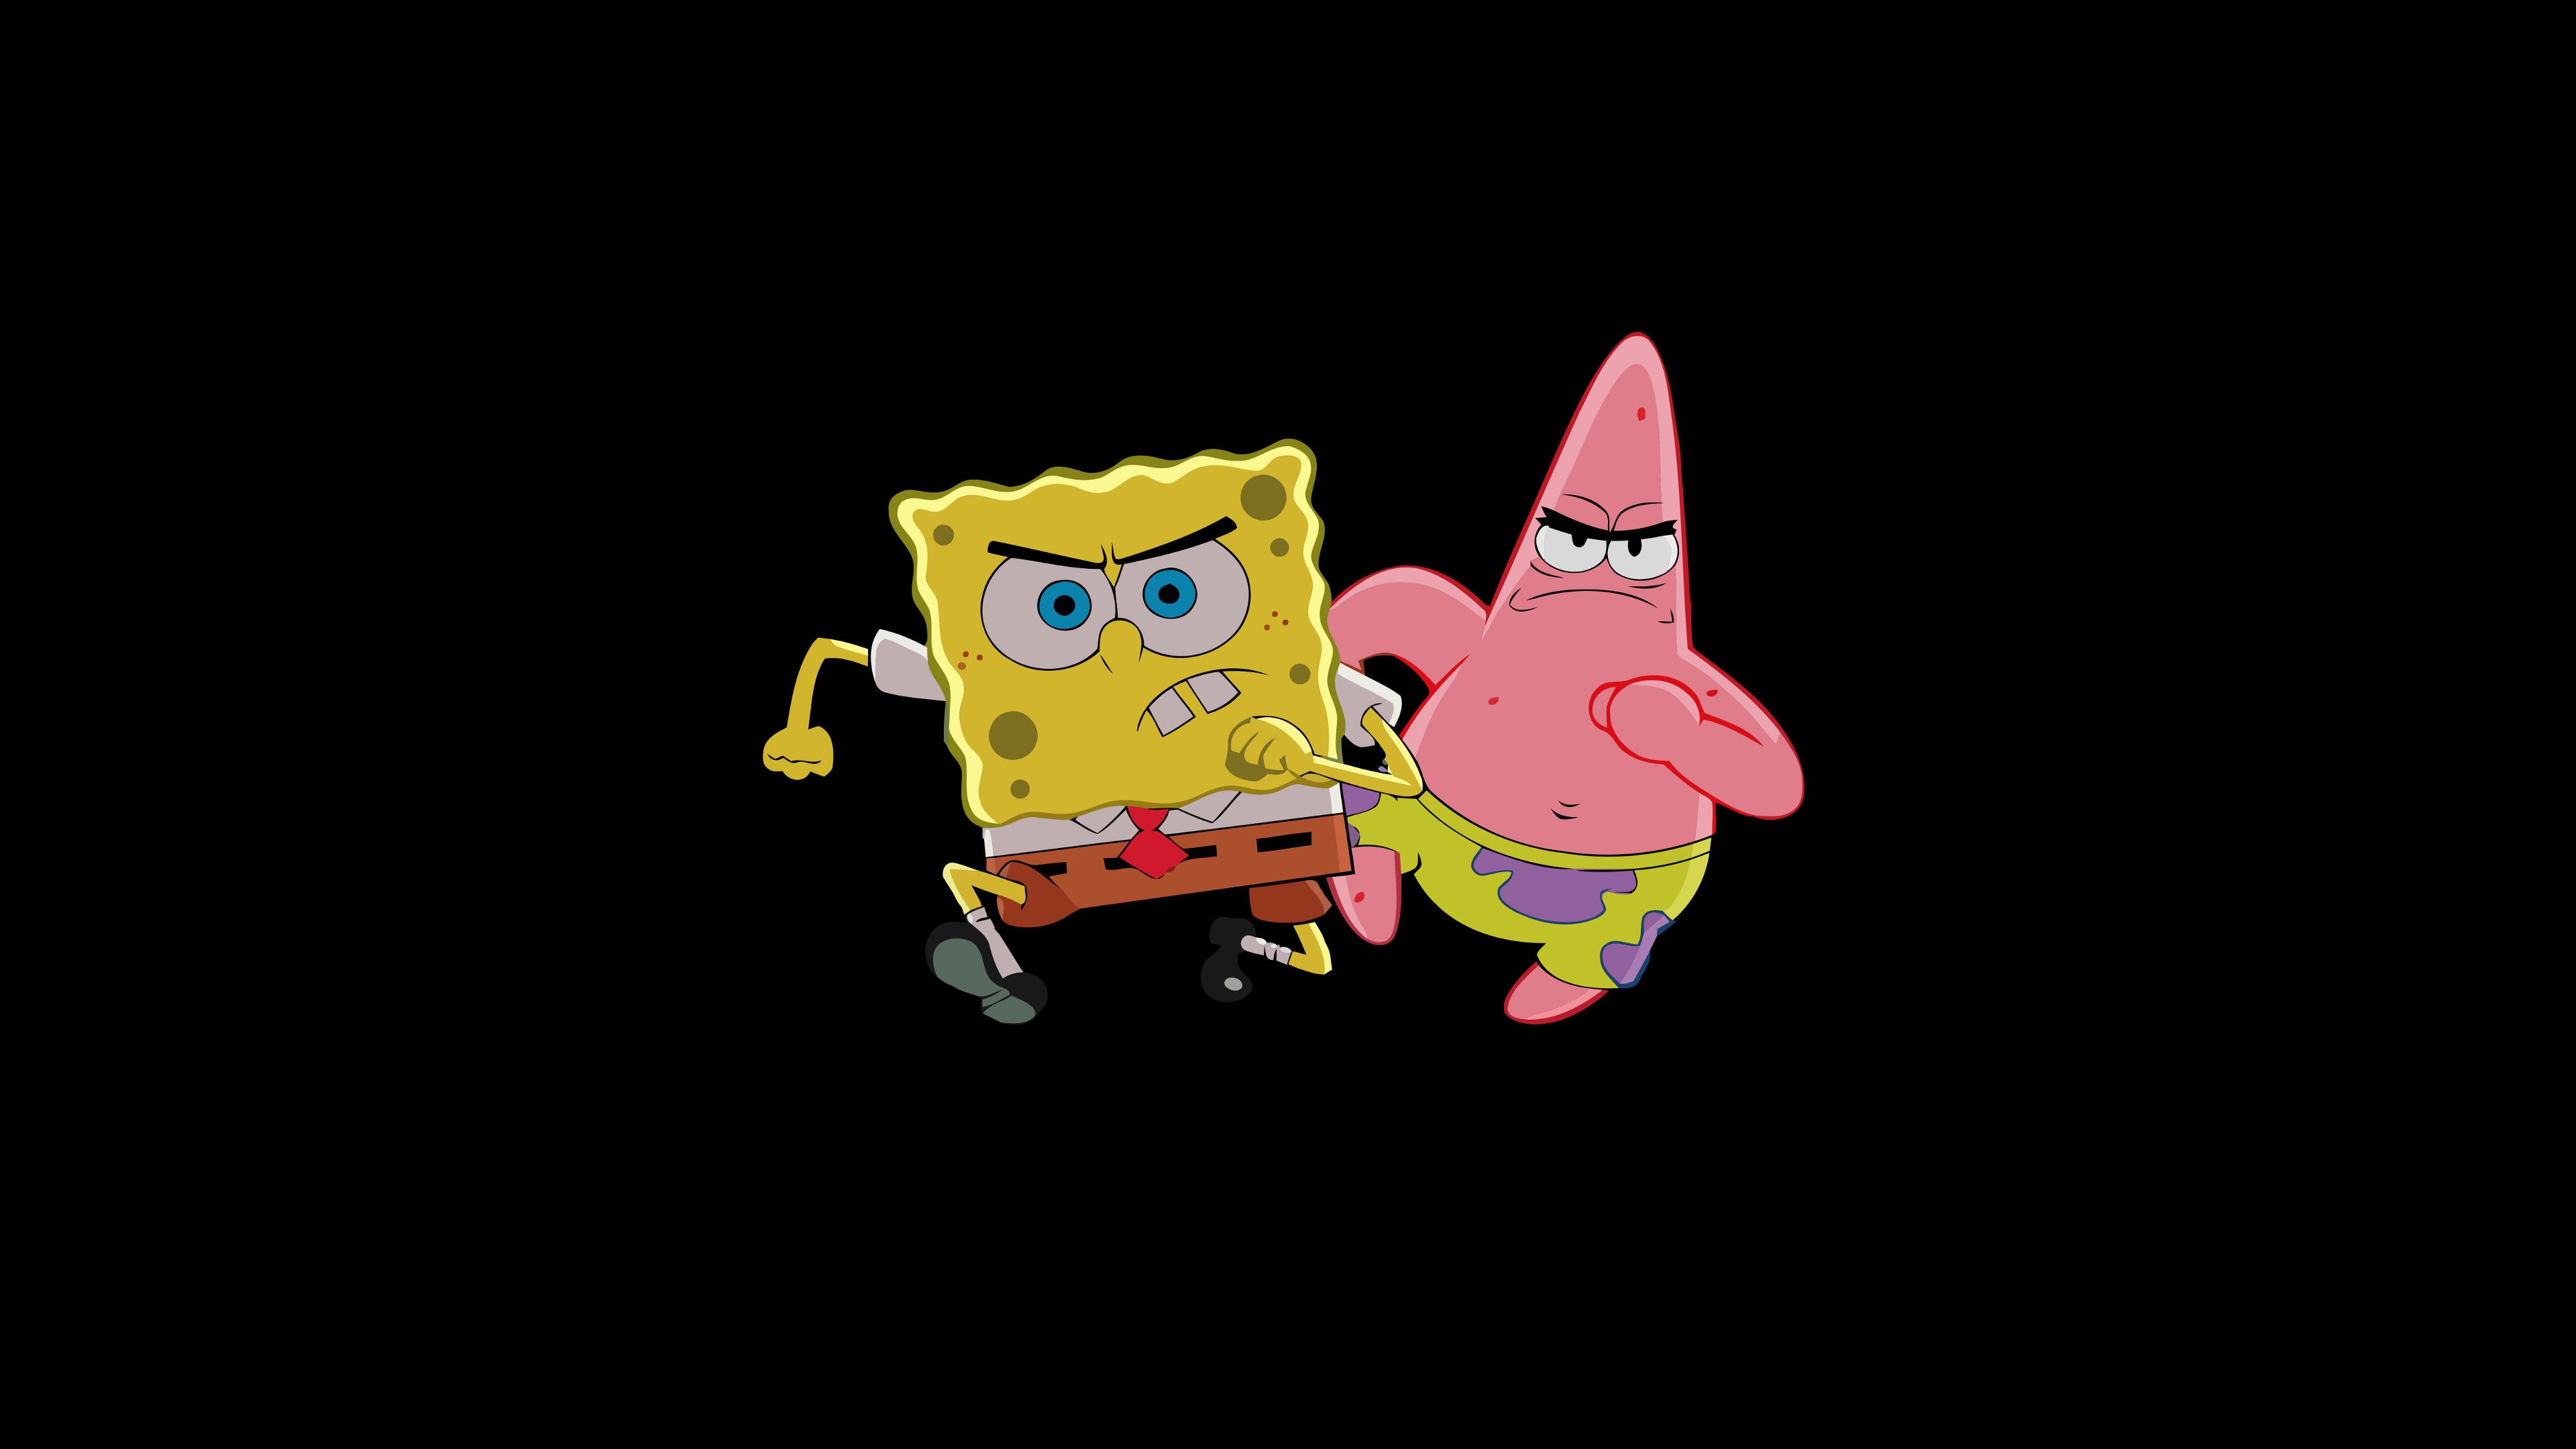 Patrick Star And Spongebob, HD Cartoons, 4k Wallpaper, Image, Background, Photo and Picture